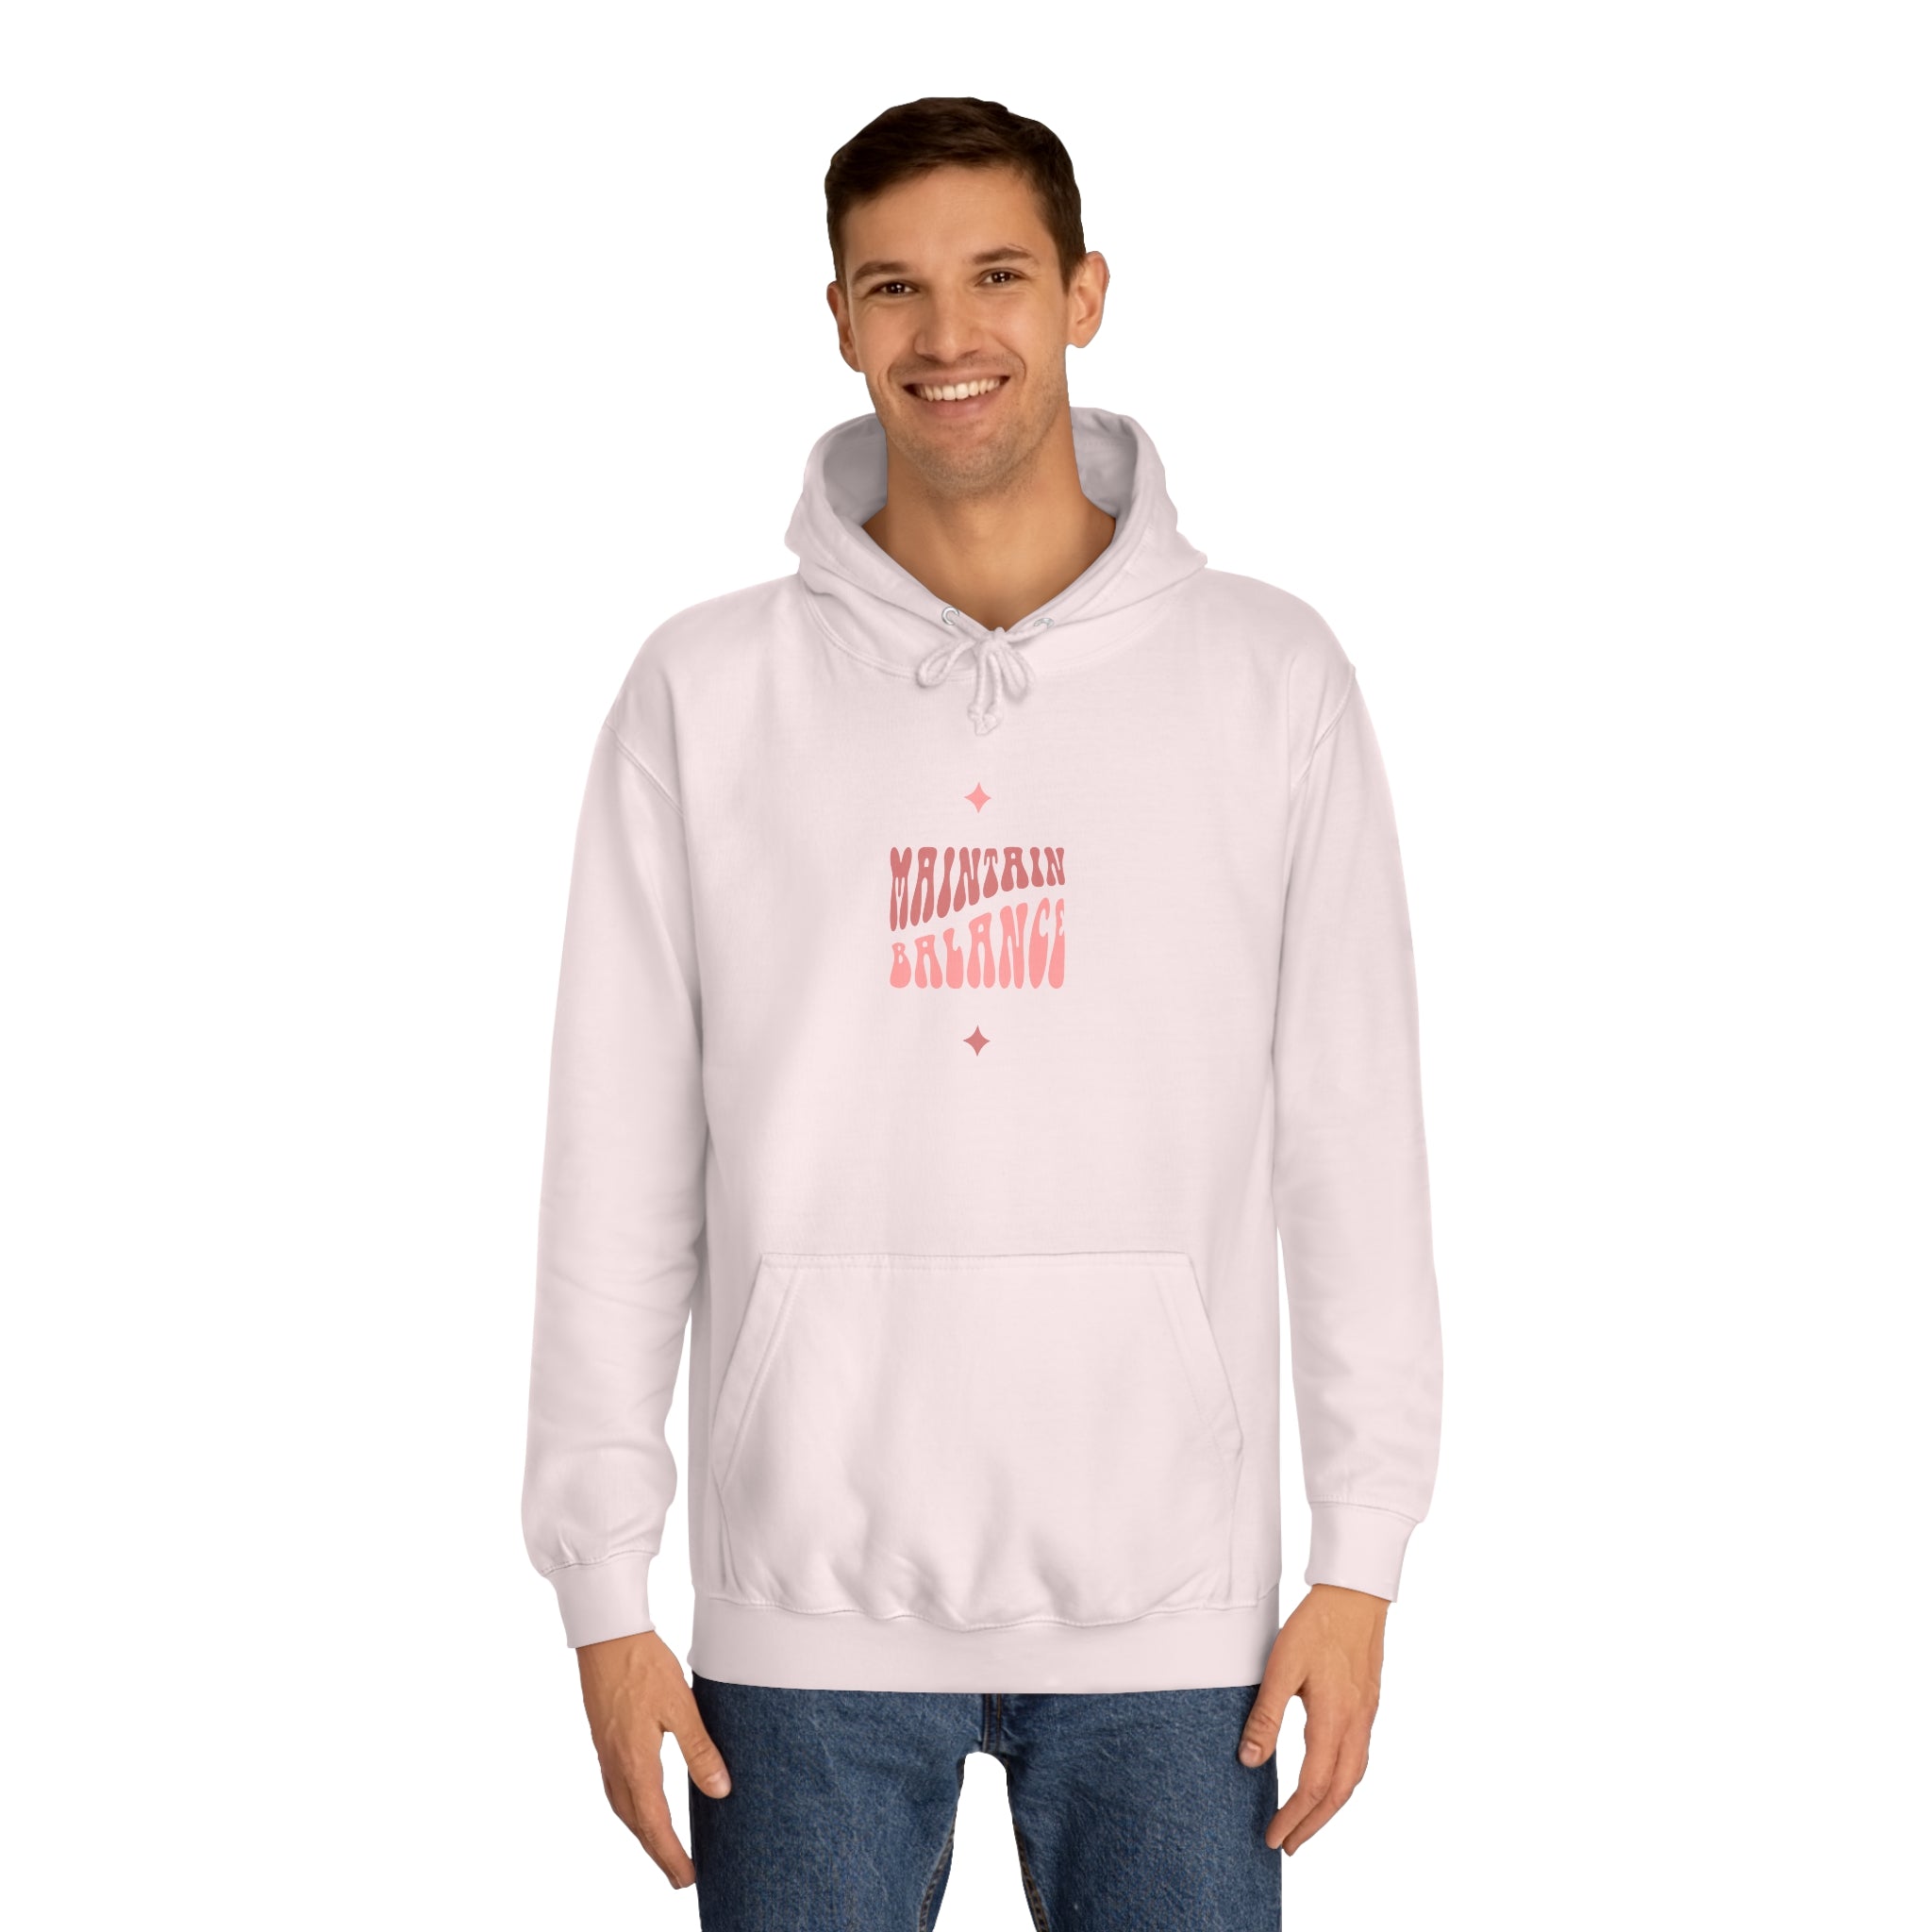 Mantra Hoodie: Maintain Balance by IANW Podcast